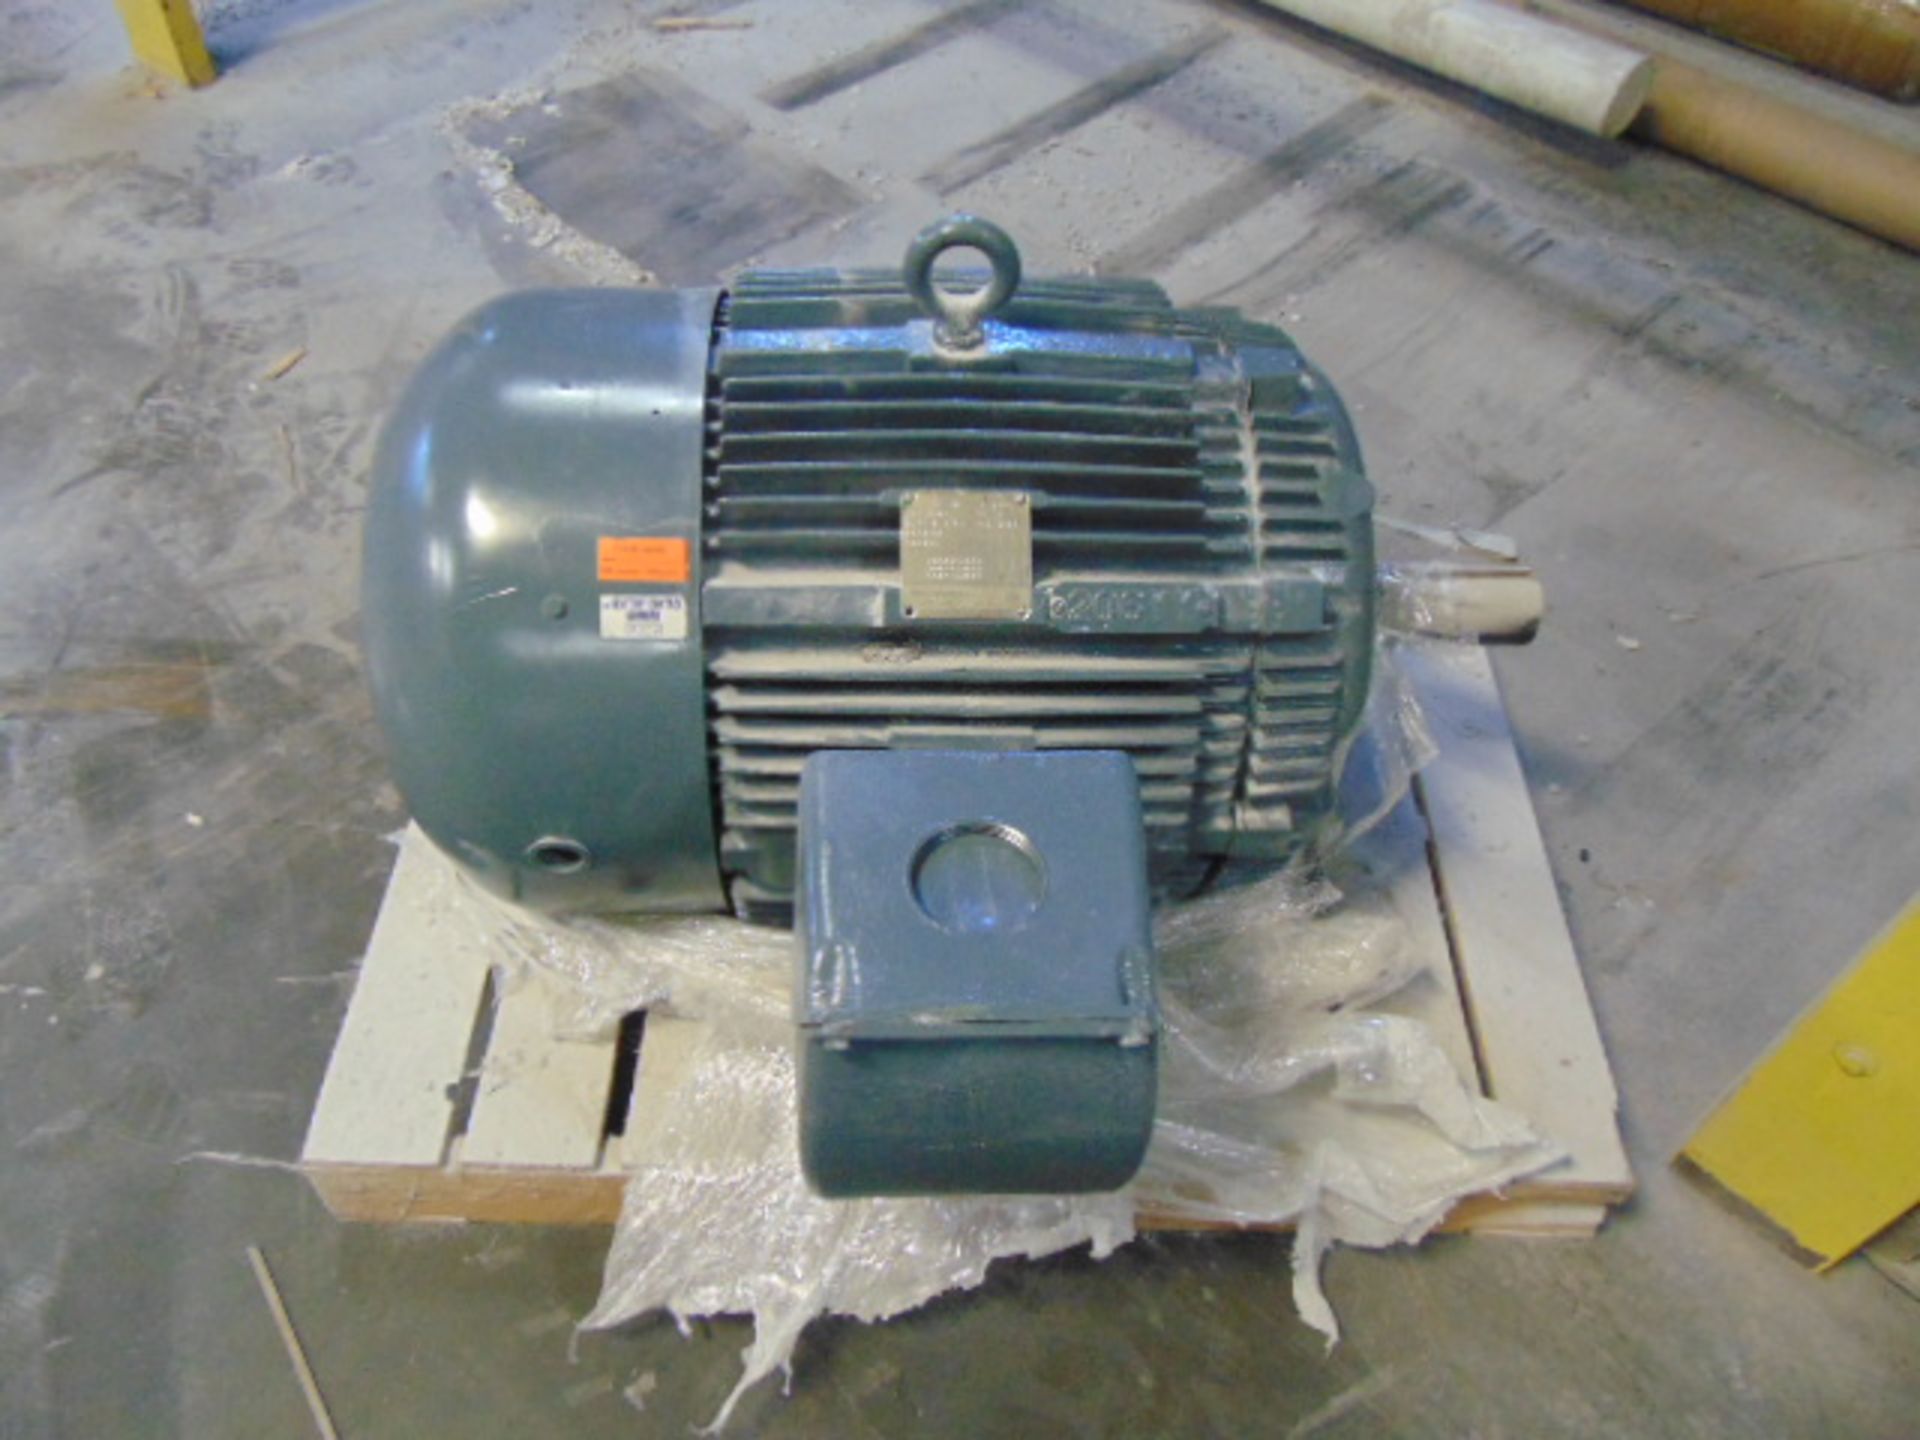 ELECTRIC MOTOR, WESTING HOUSE, 75 HP